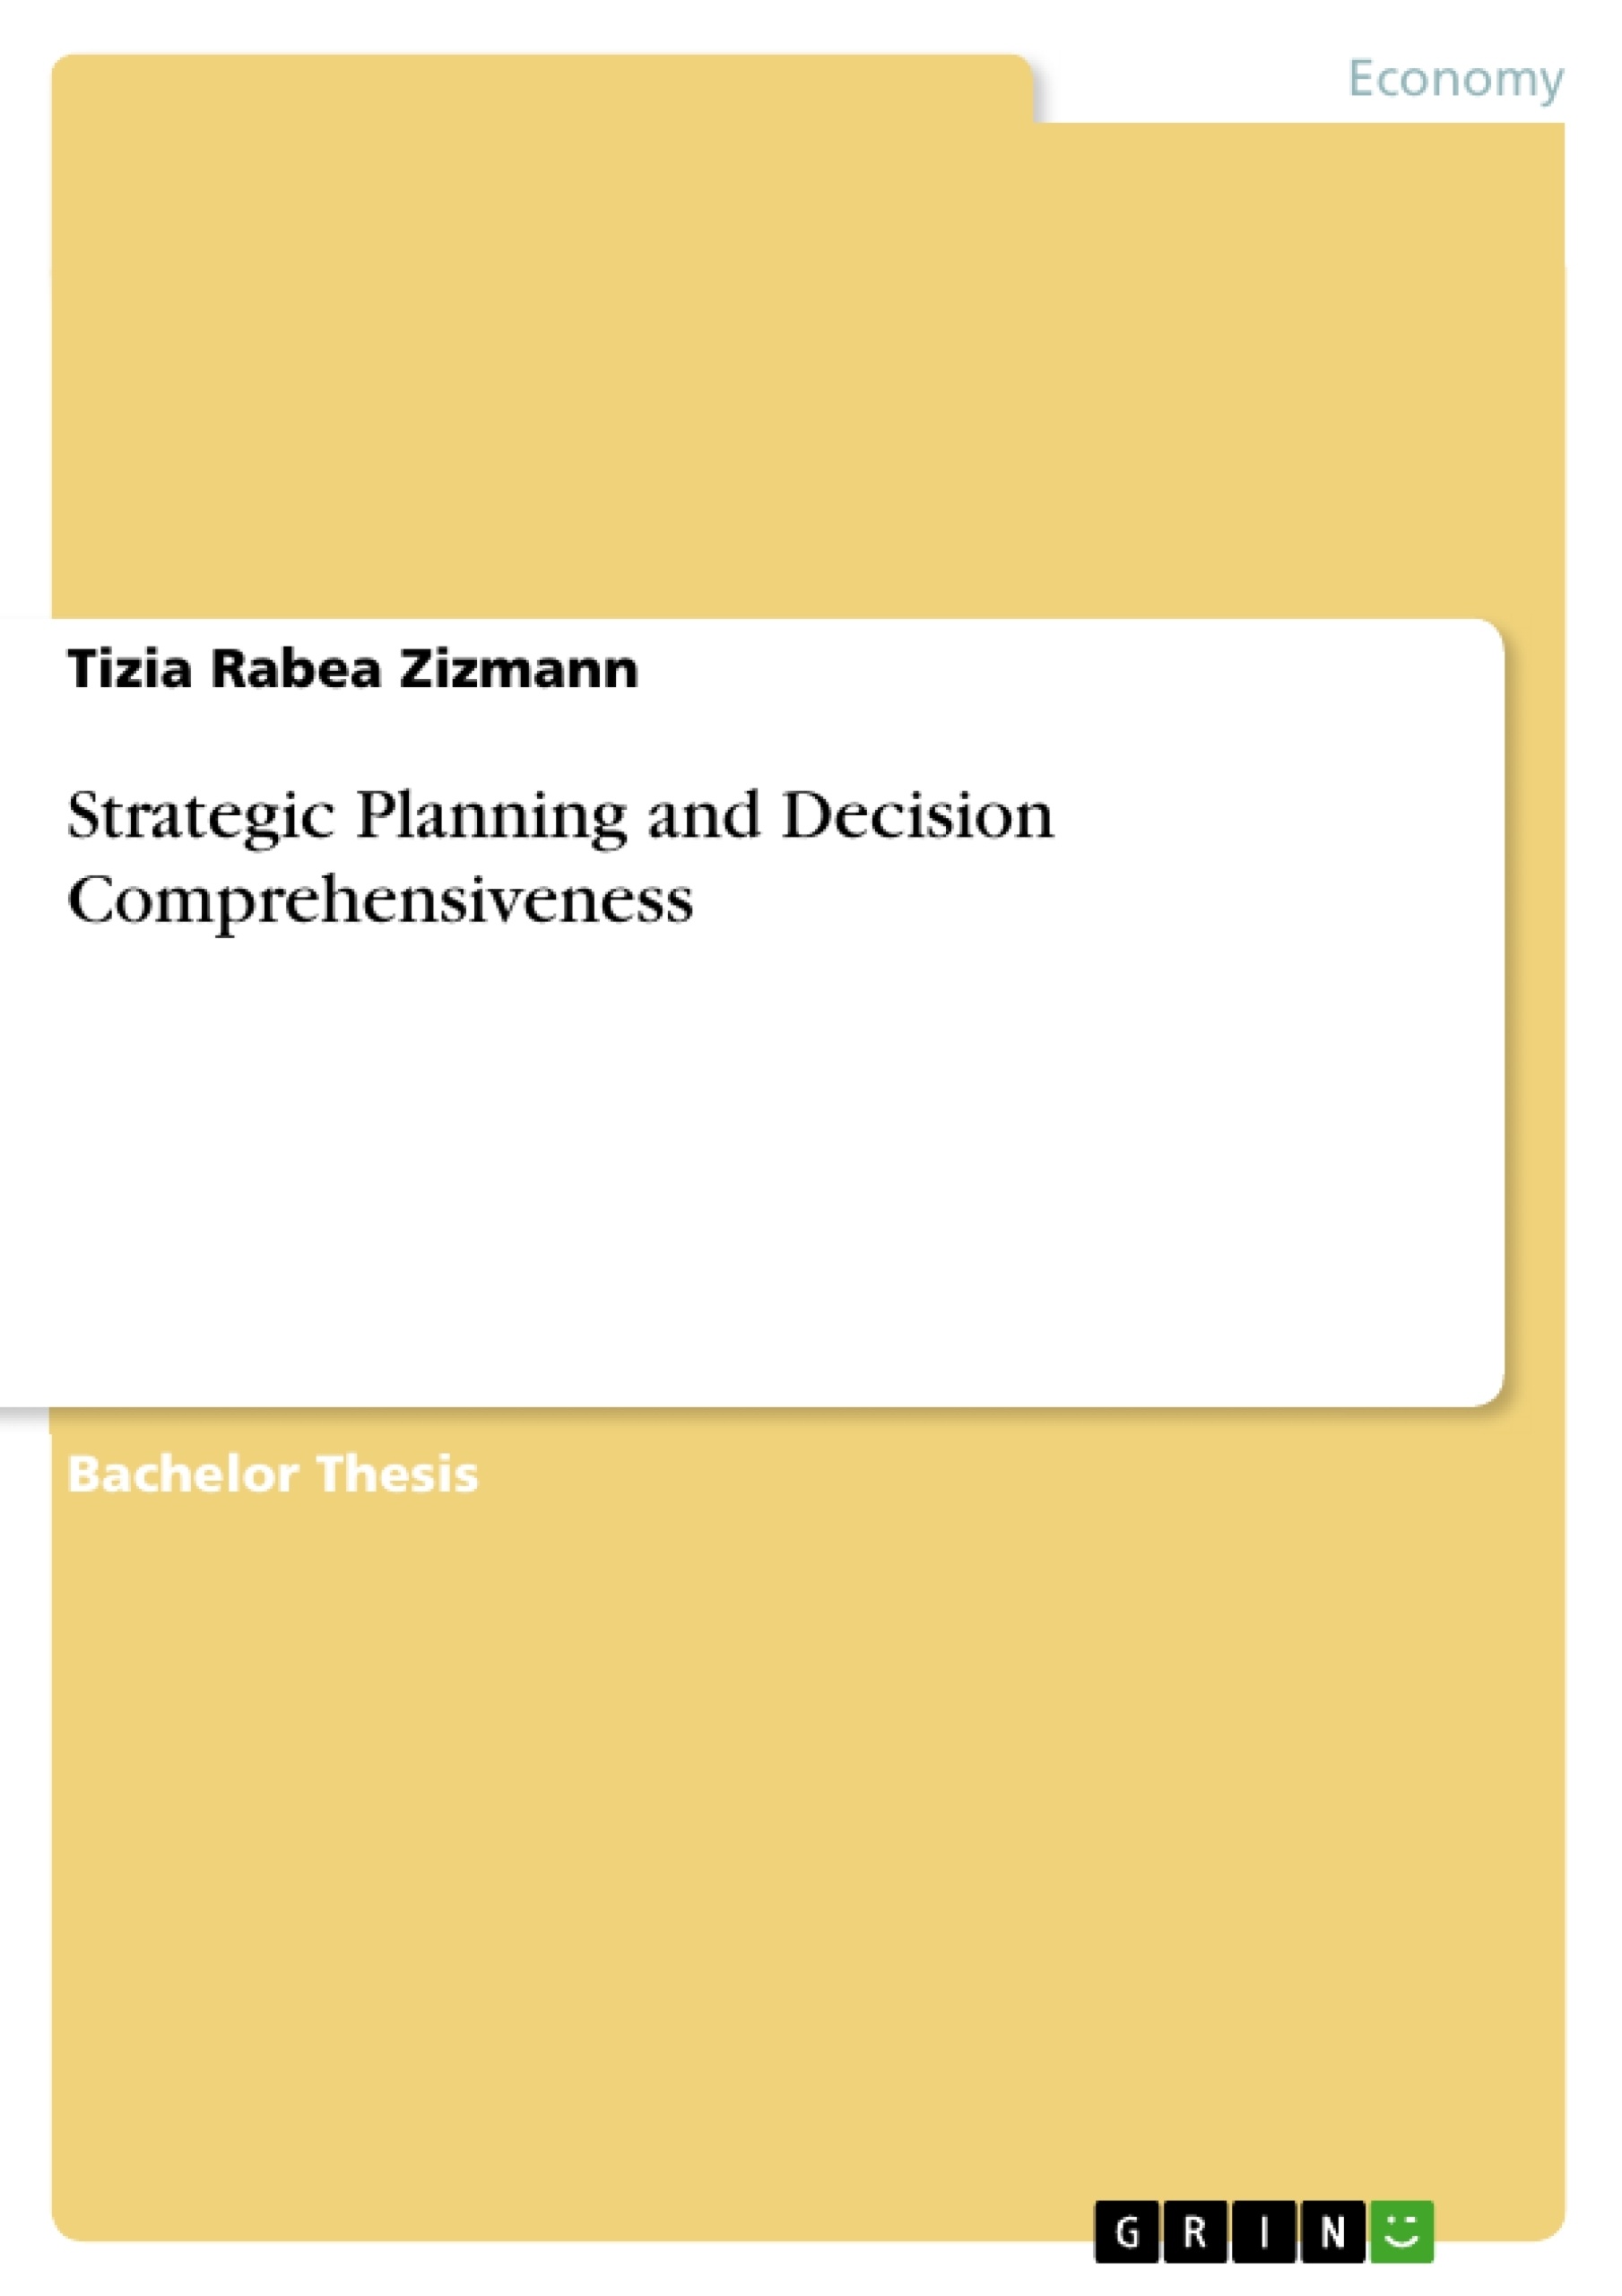 Title: Strategic Planning and Decision Comprehensiveness